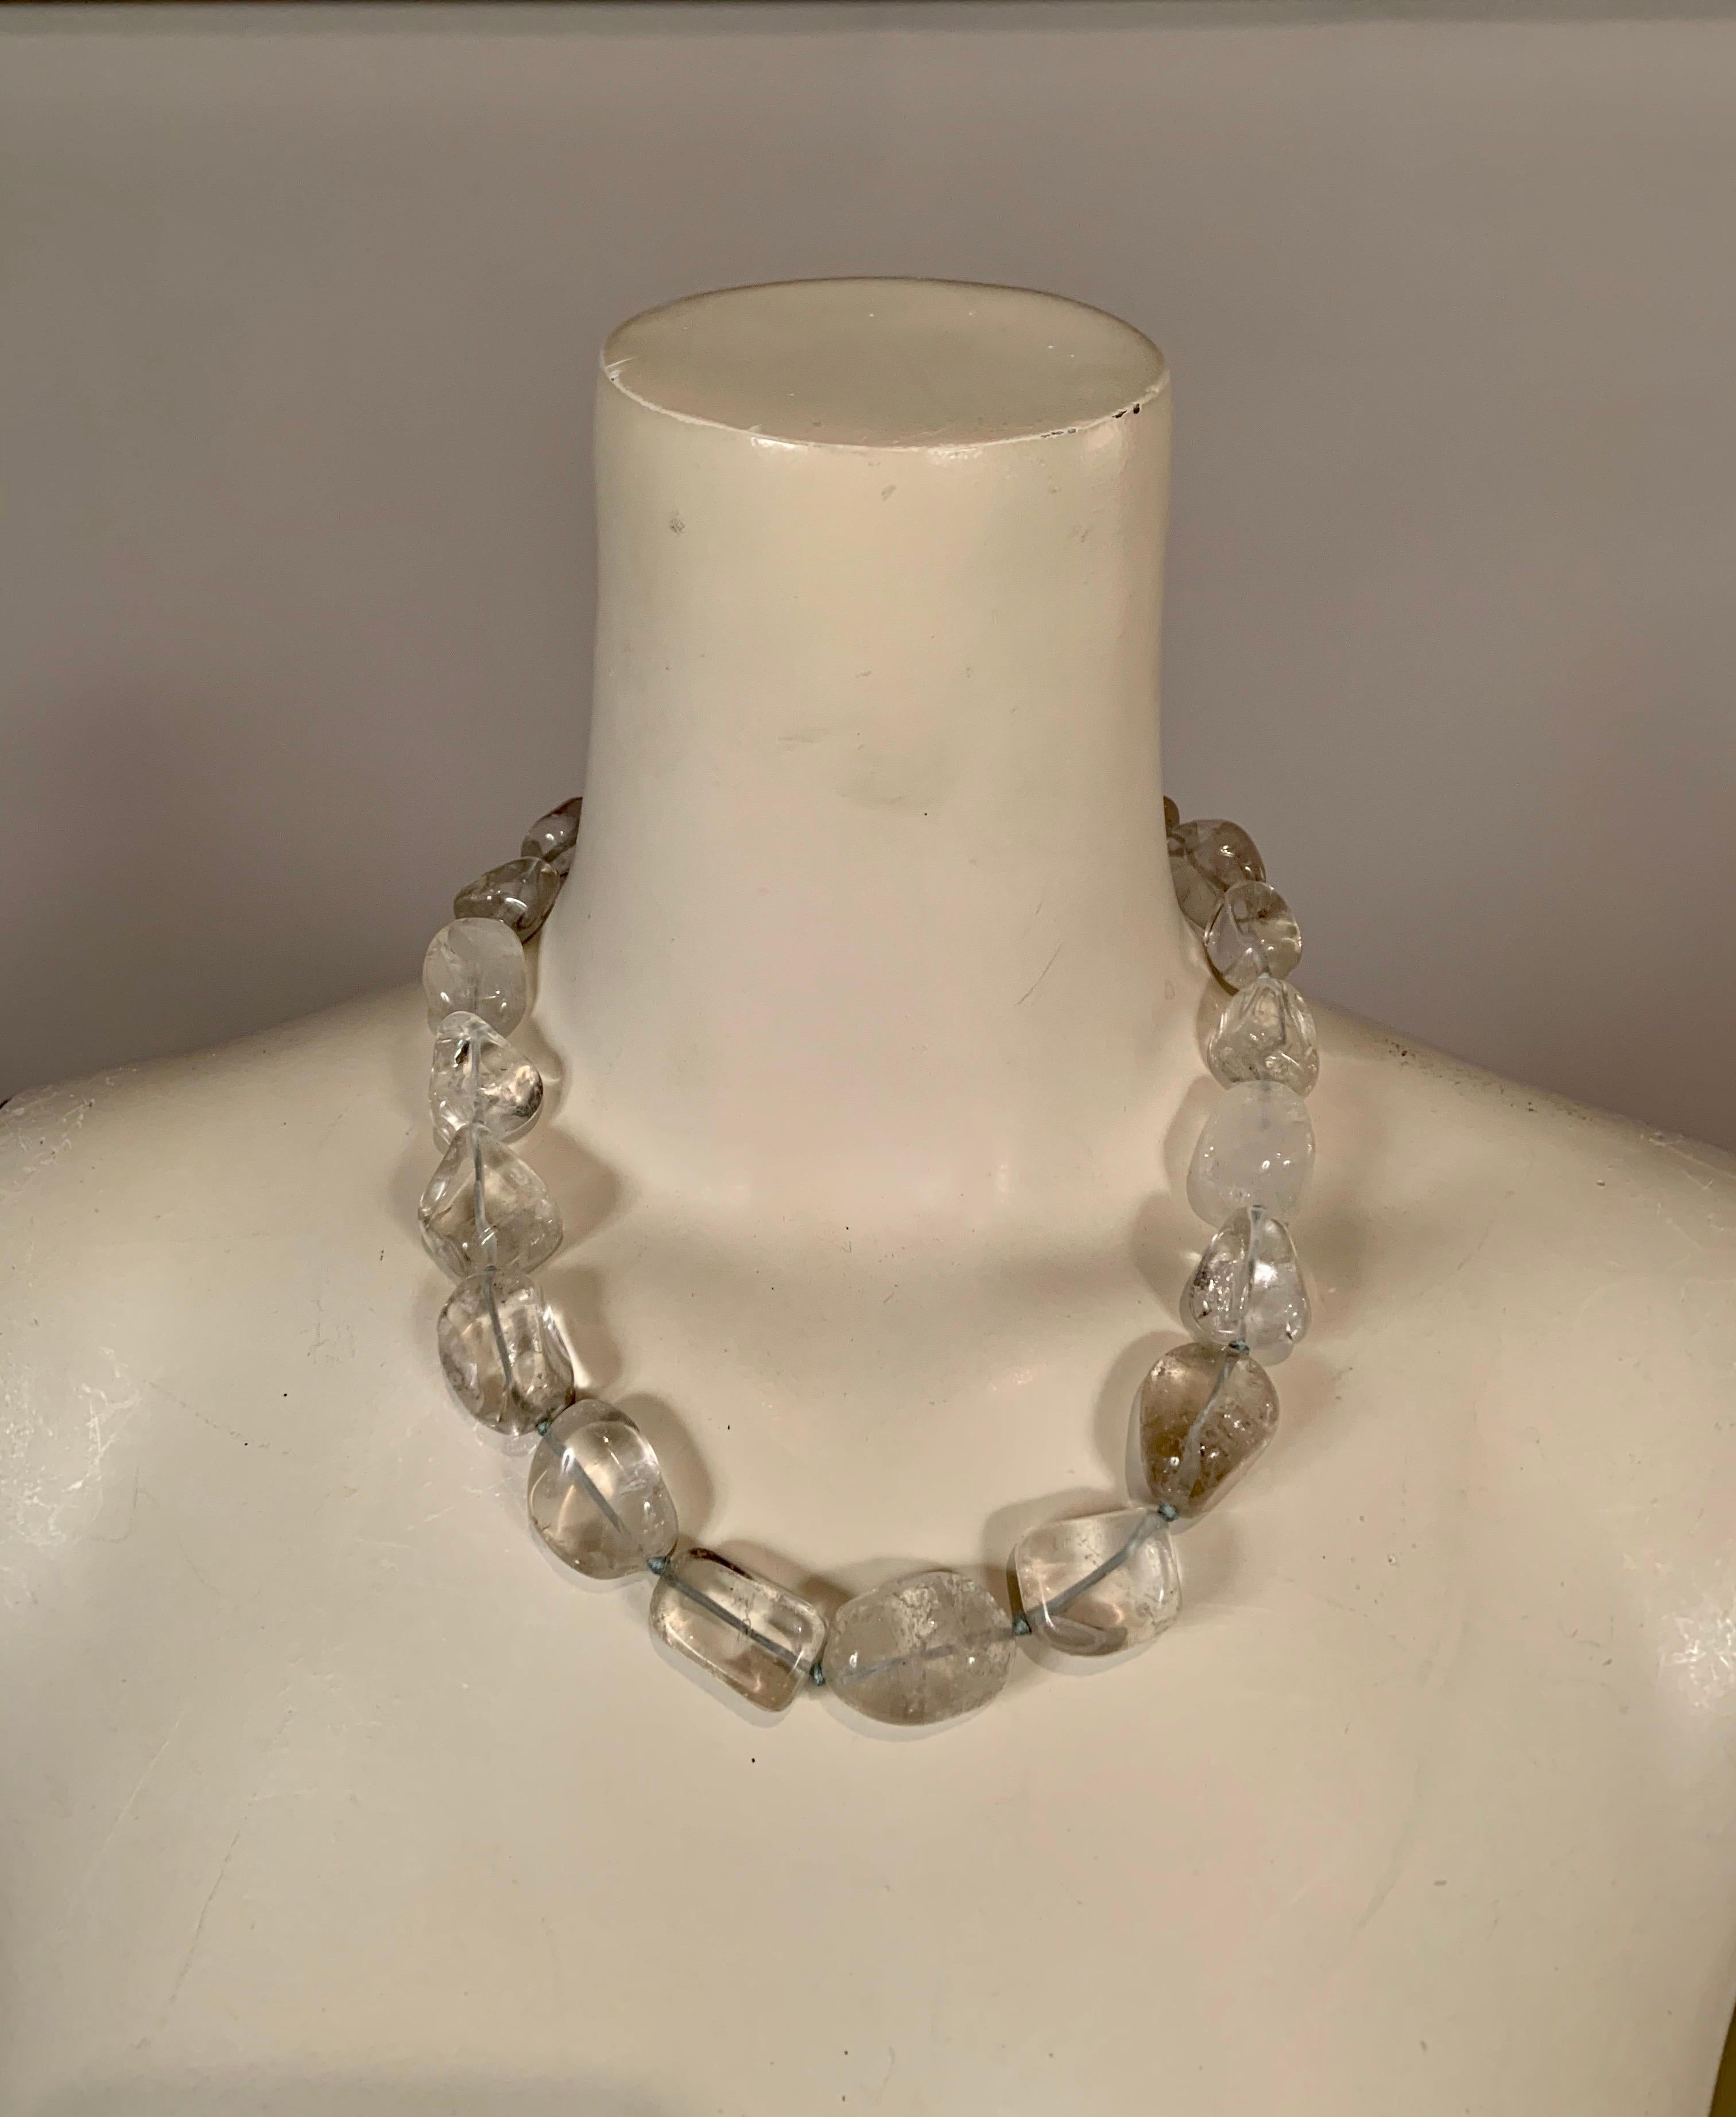 This chunky hand knotted rock crystal necklace is composed of 20 large beads with a smooth finish and irregular shapes for a one of a kind piece. It has a sterling clasp composed of two interlocking
rings on the same scale as the crystals. It is in